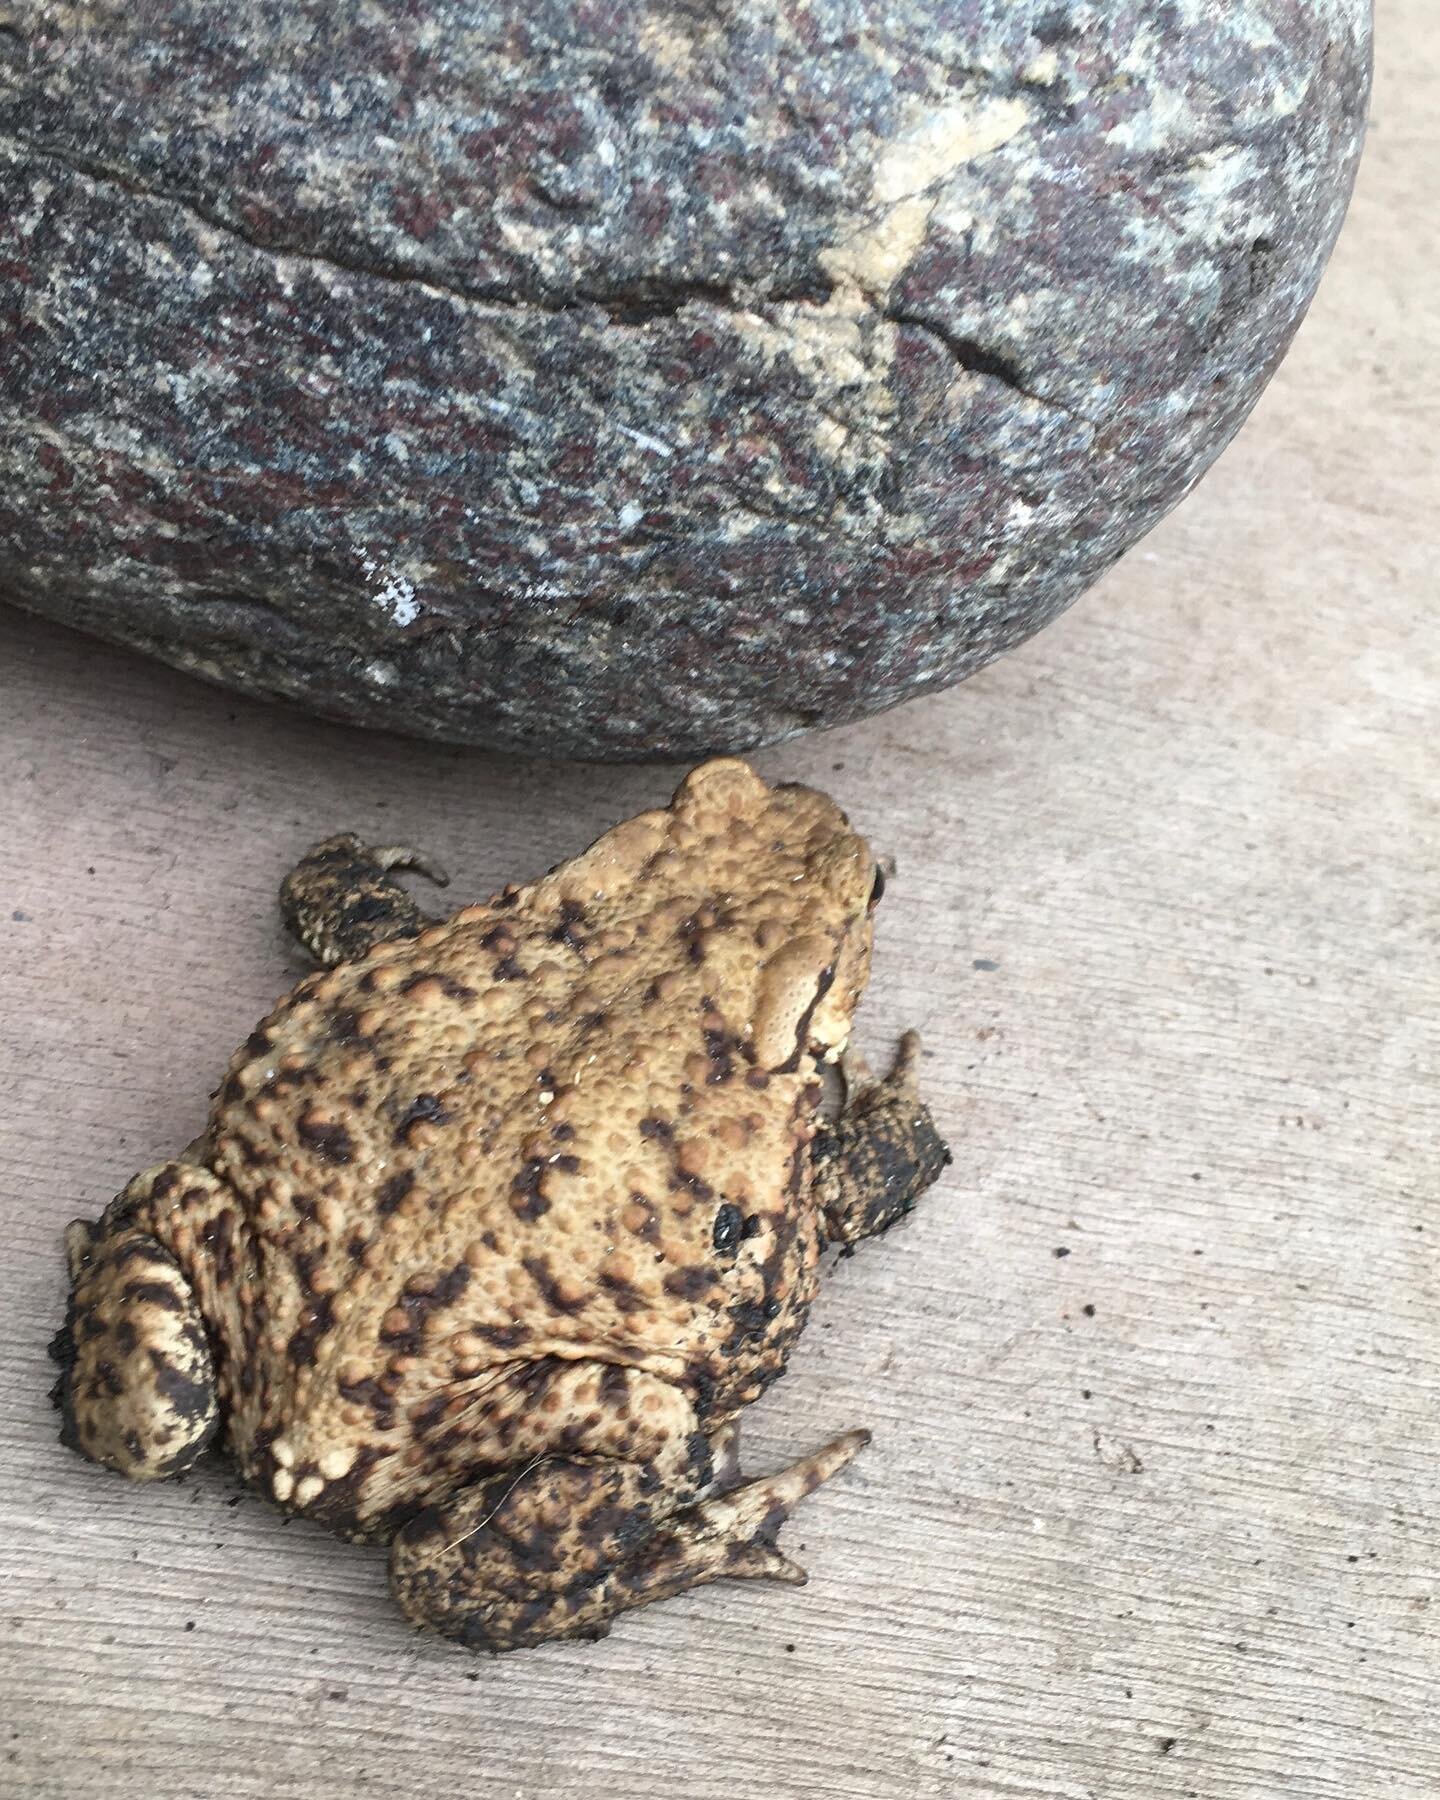 I have a bold new studio toad. Yesterday he was outside &lsquo;hiding&rsquo; by the doorstop, today he was in&hellip; and then hid in the dustiest corner he could find. #welcomeguest  #bigtoad #flycatcher #creativetoady #loveamphibians #